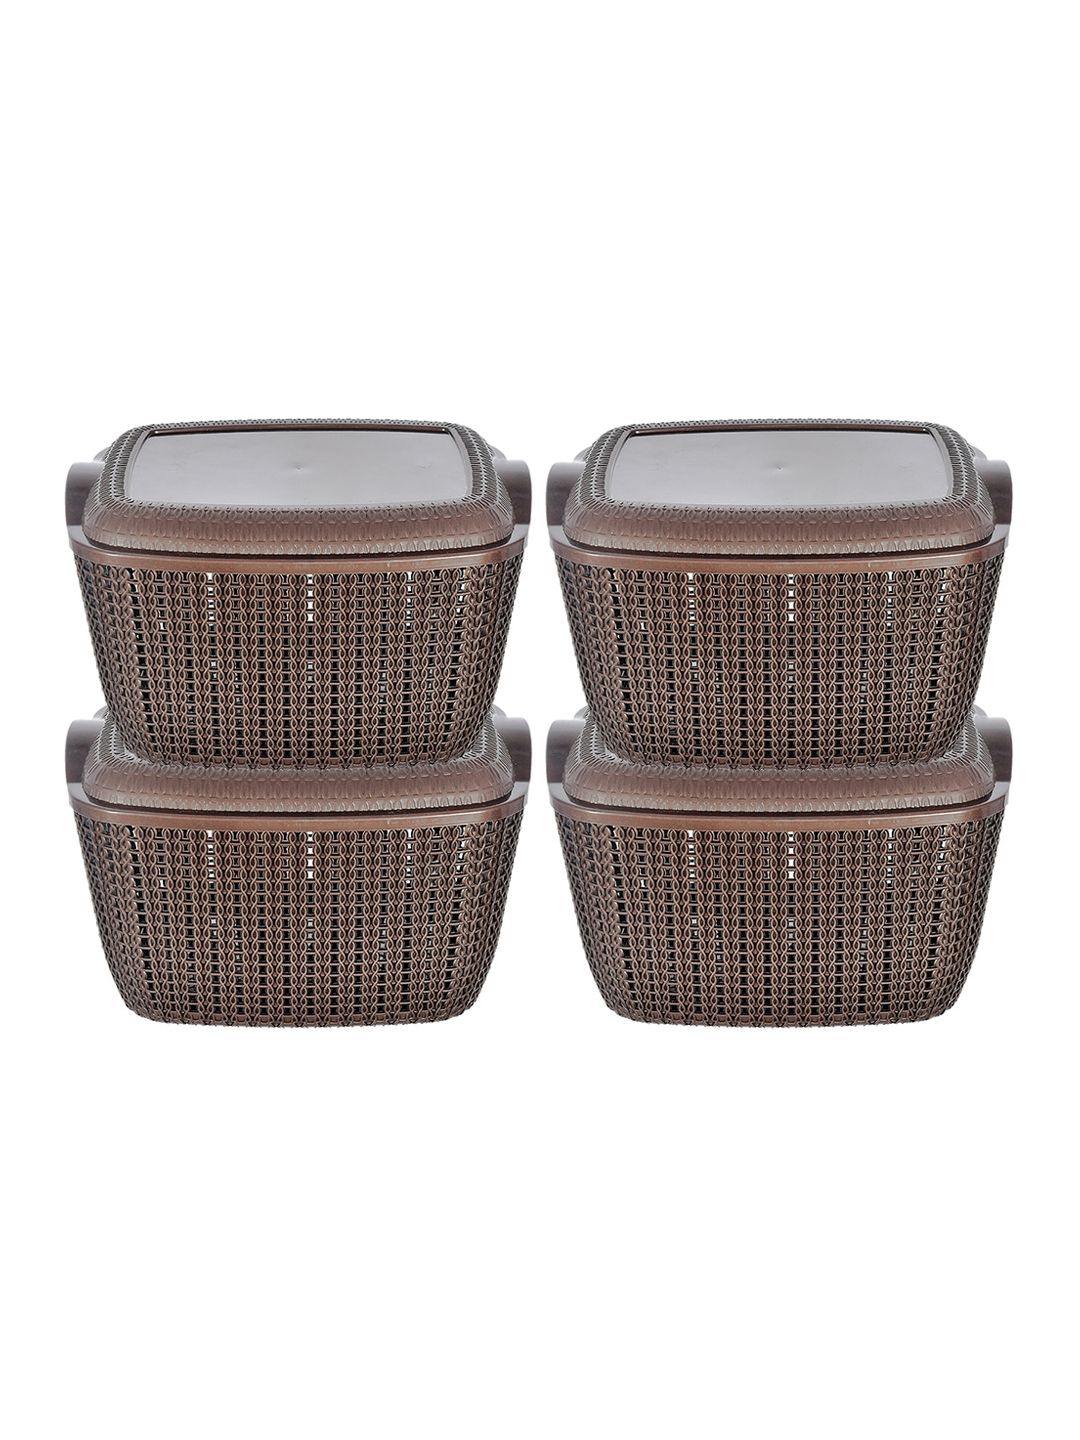 Kuber Industries Set Of 4 Brown Textured Plastic Baskets With Lids Price in India